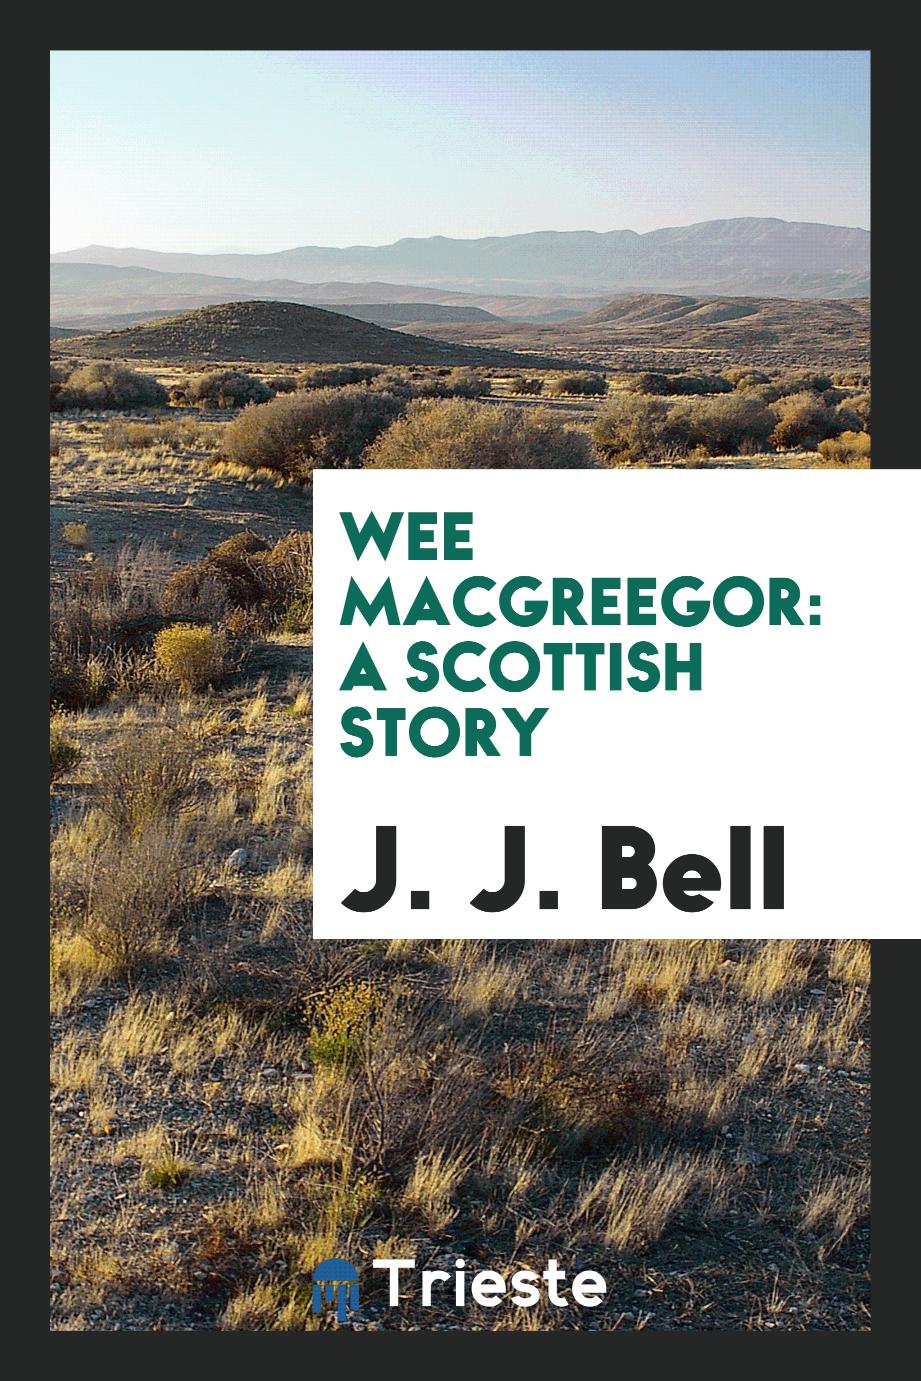 Wee MacGreegor: a Scottish story